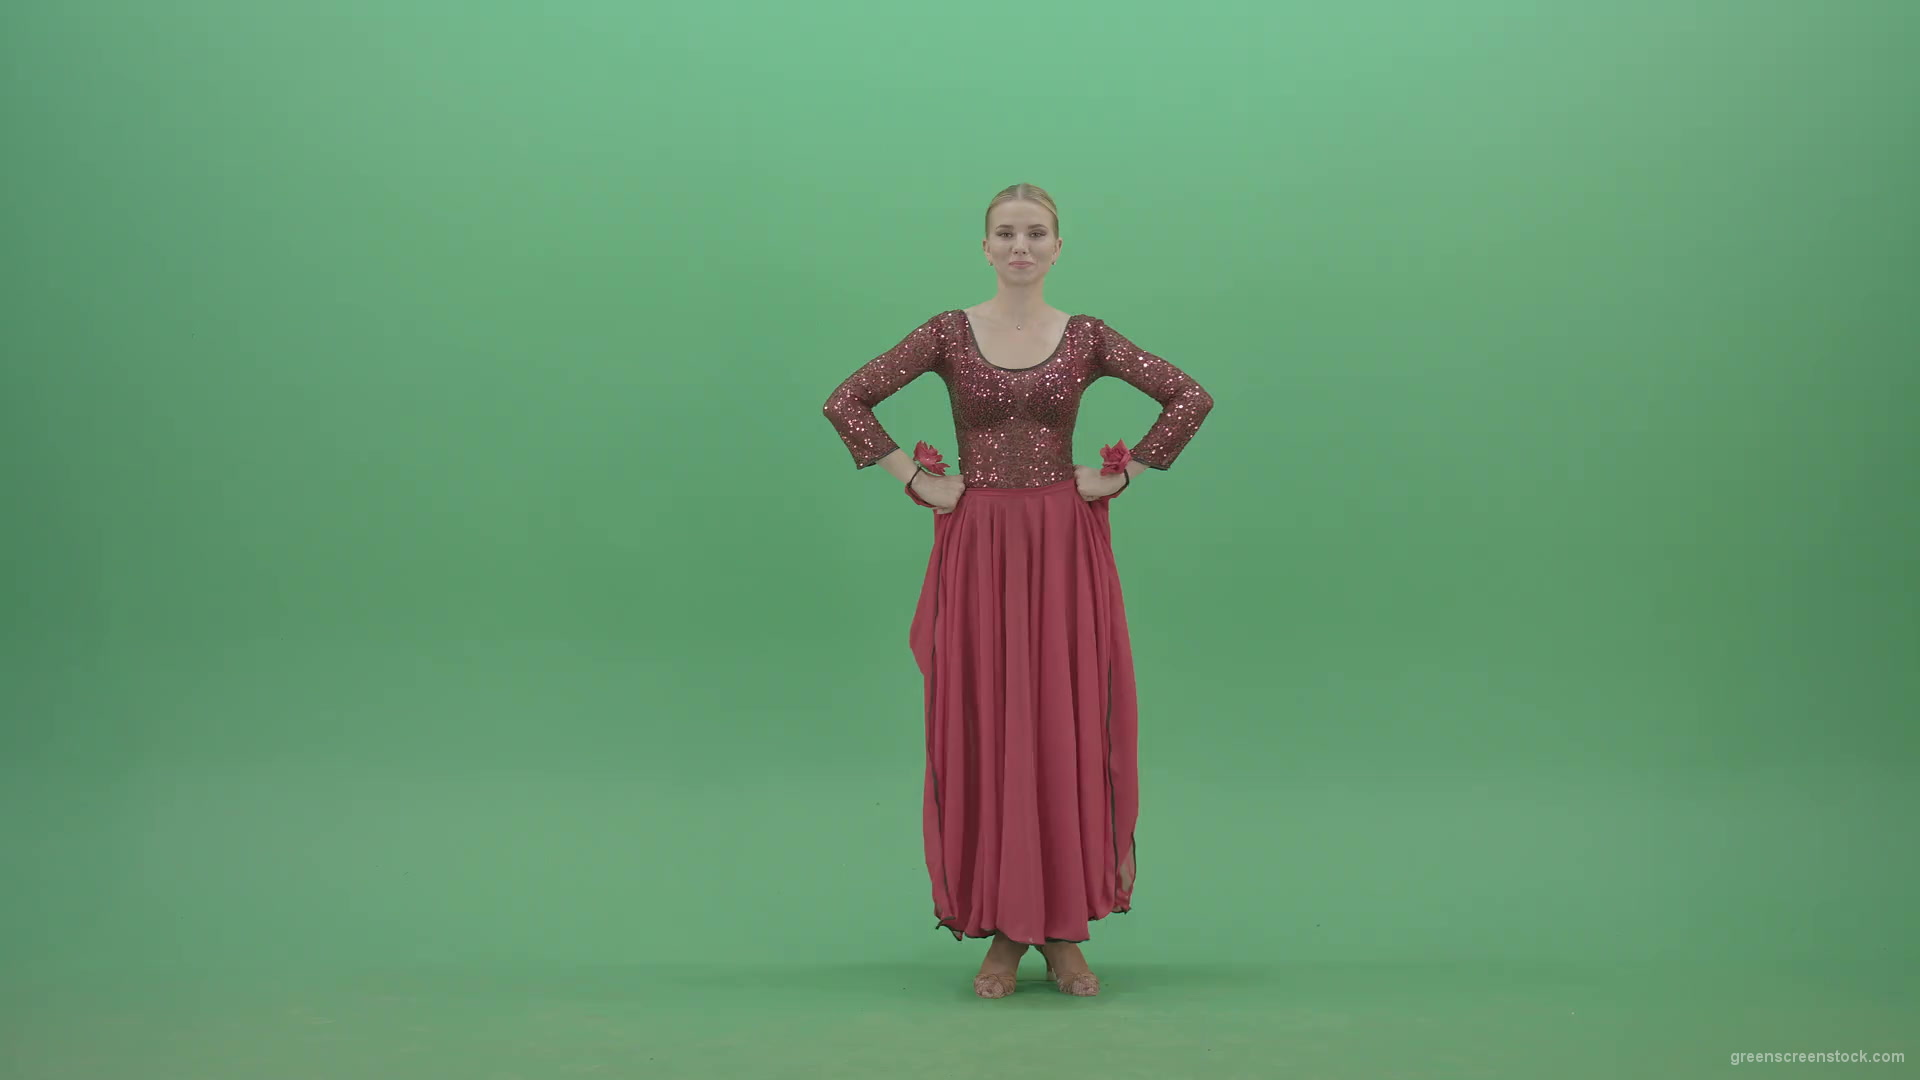 Elegant-woman-in-red-ballroom-dress-spinning-and-clapping-in-hands-isolated-on-green-screen-4K-Video-Footage-1920_001 Green Screen Stock